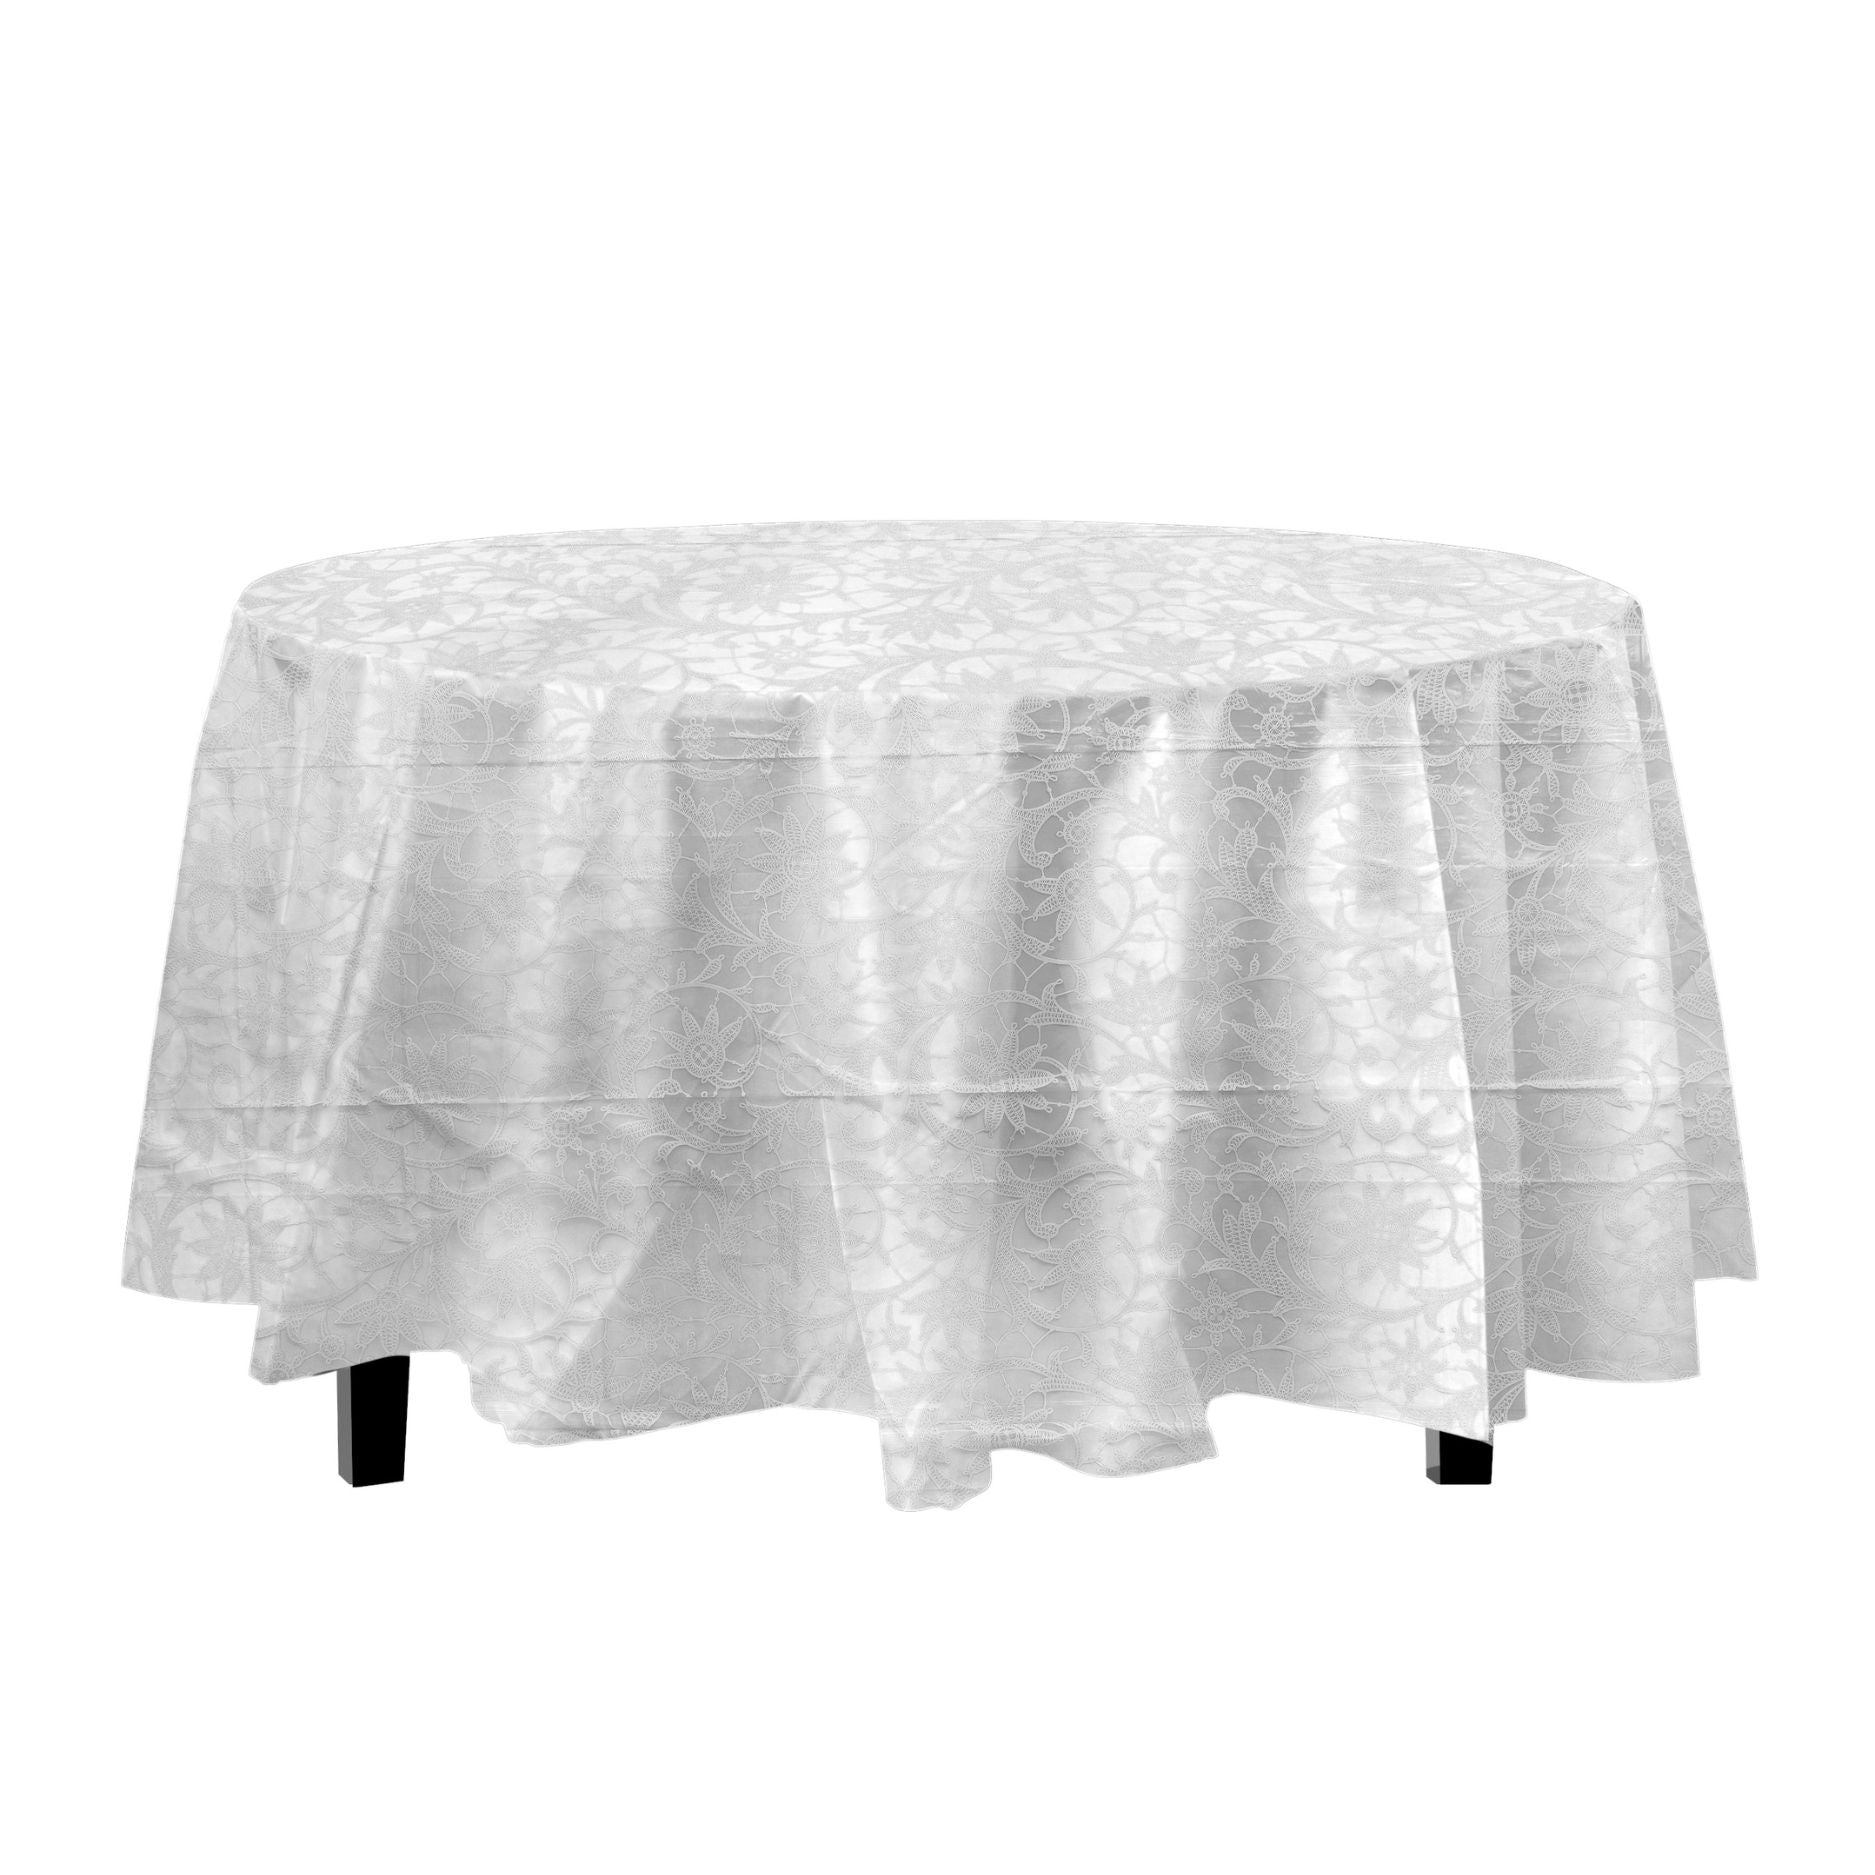 84in. Round Printed Plastic Table Cover White Lace | 48 Count